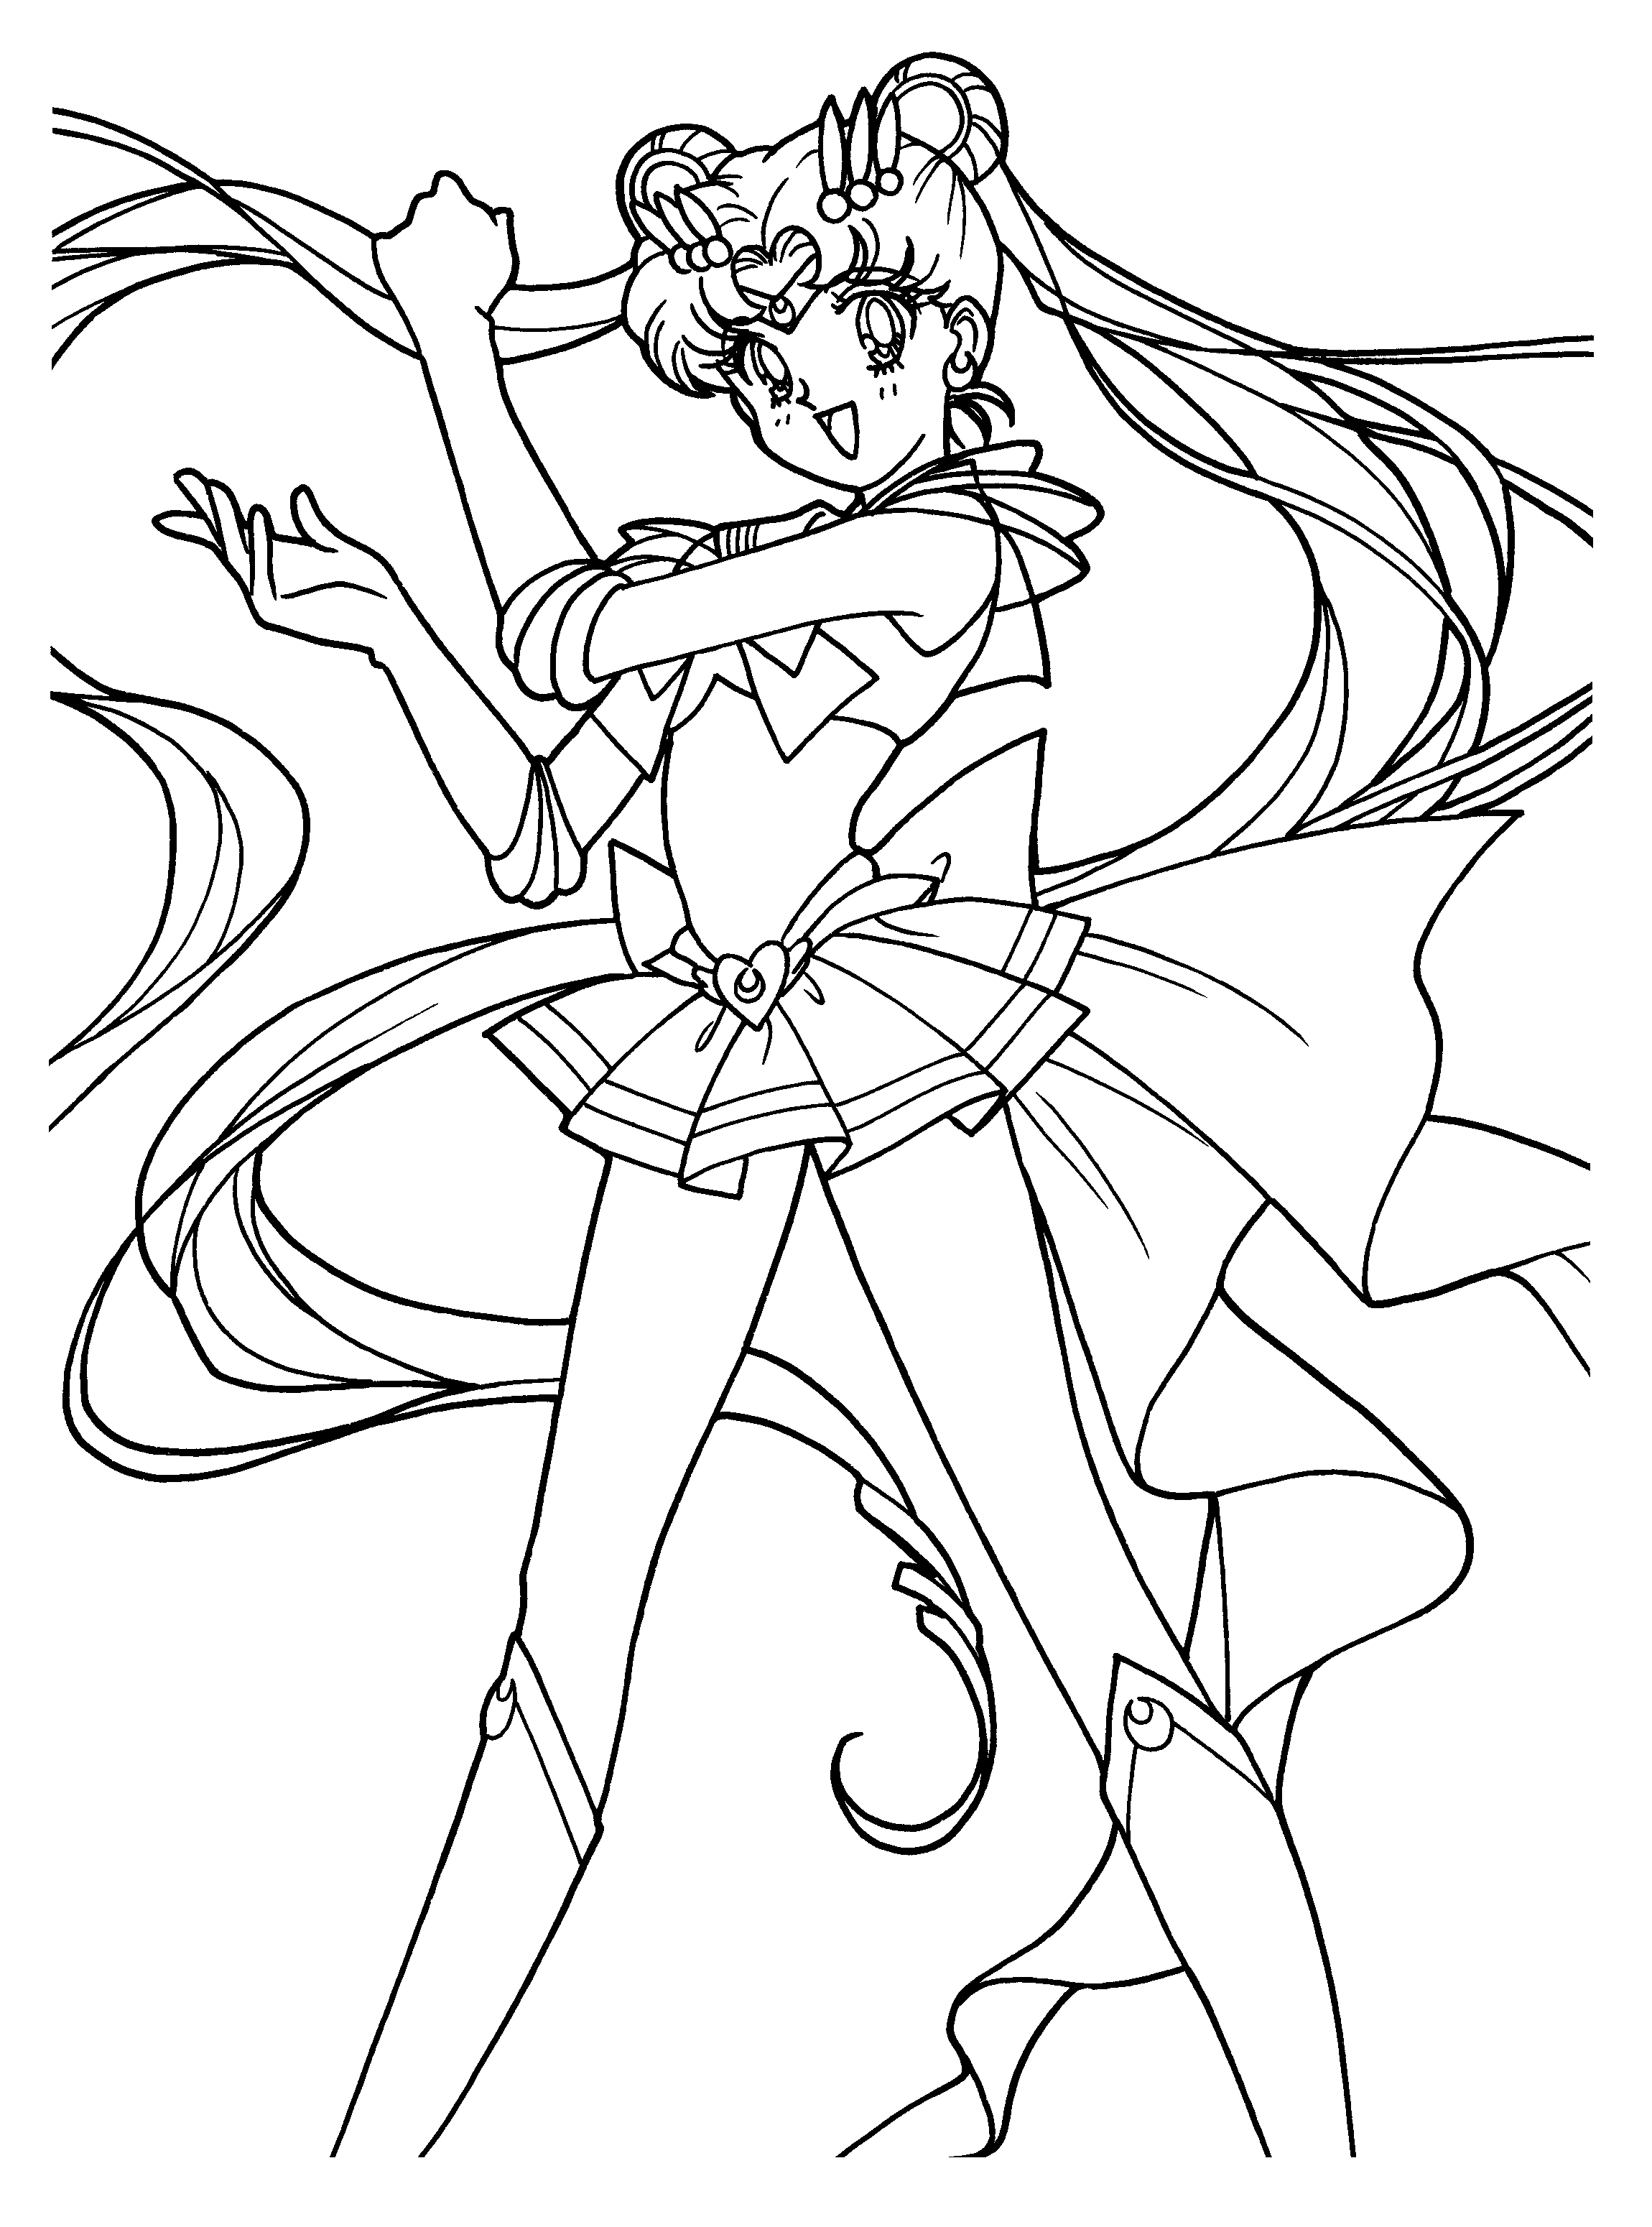 sailor moon coloring pages coloring pages sailor moon animated images gifs sailor coloring moon pages 